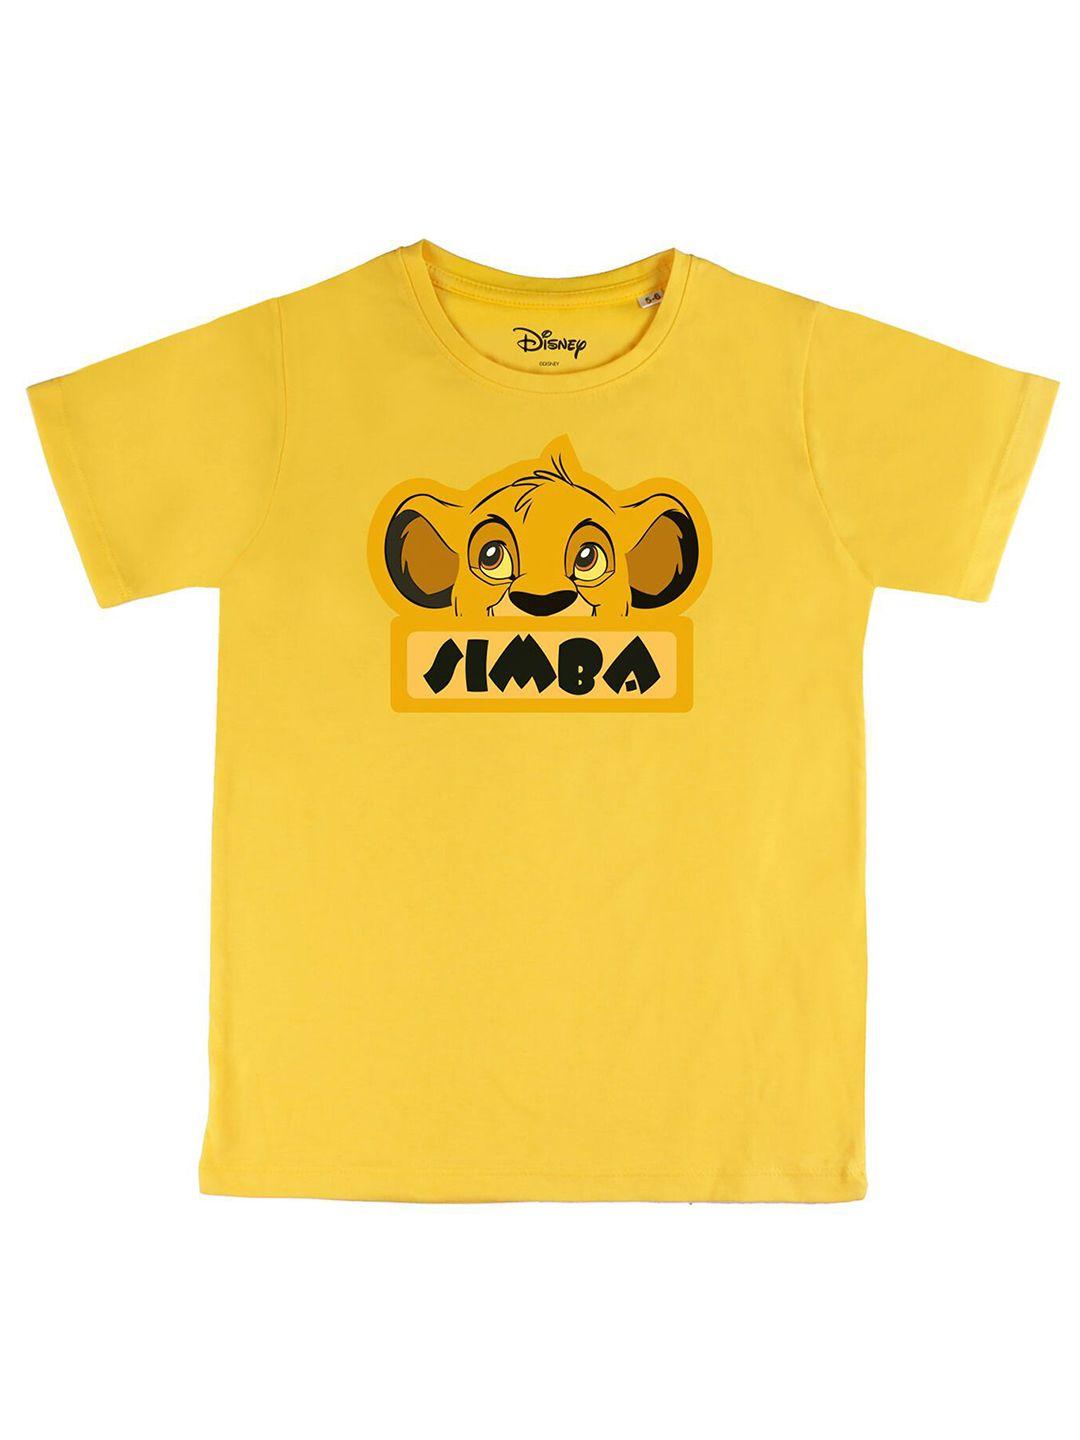 disney by wear your mind boys yellow simba printed t-shirt